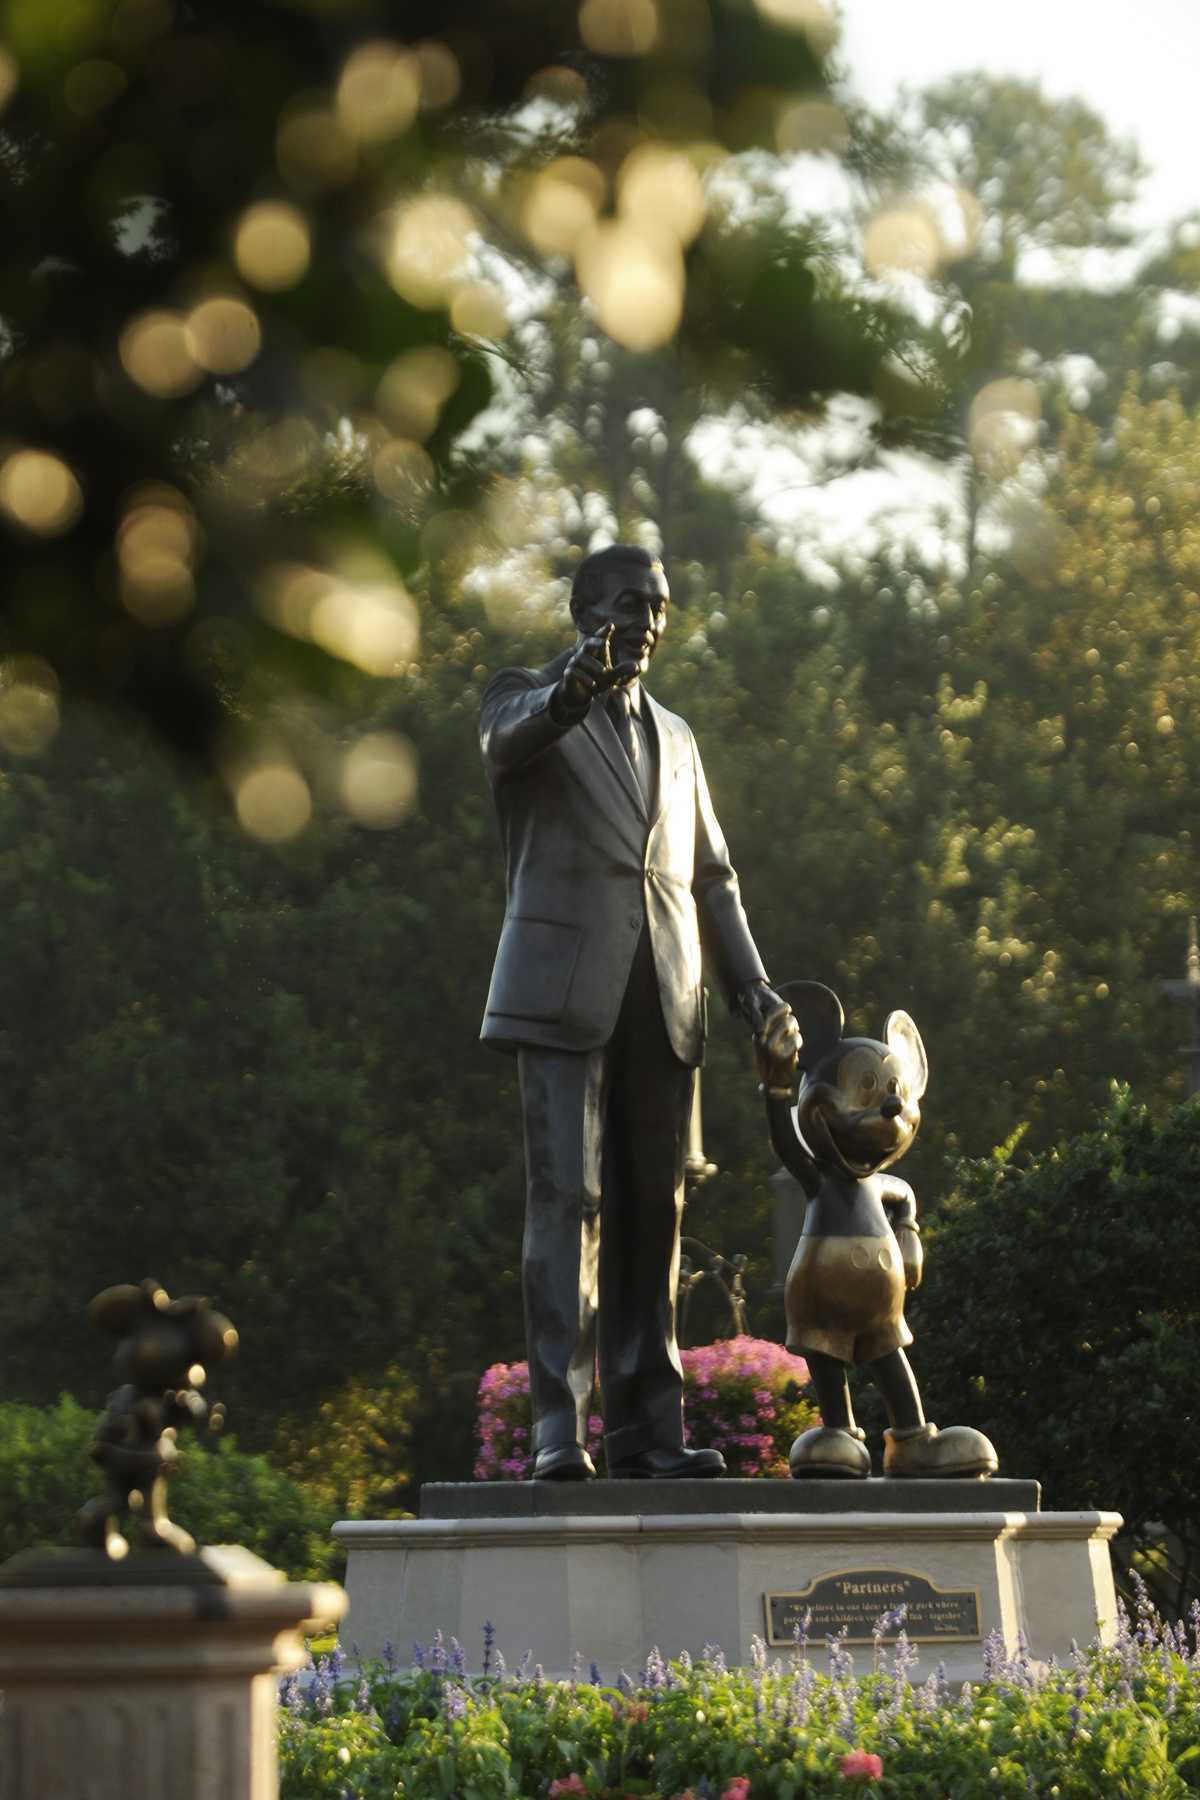 5 facts about Disney's Partners Statue